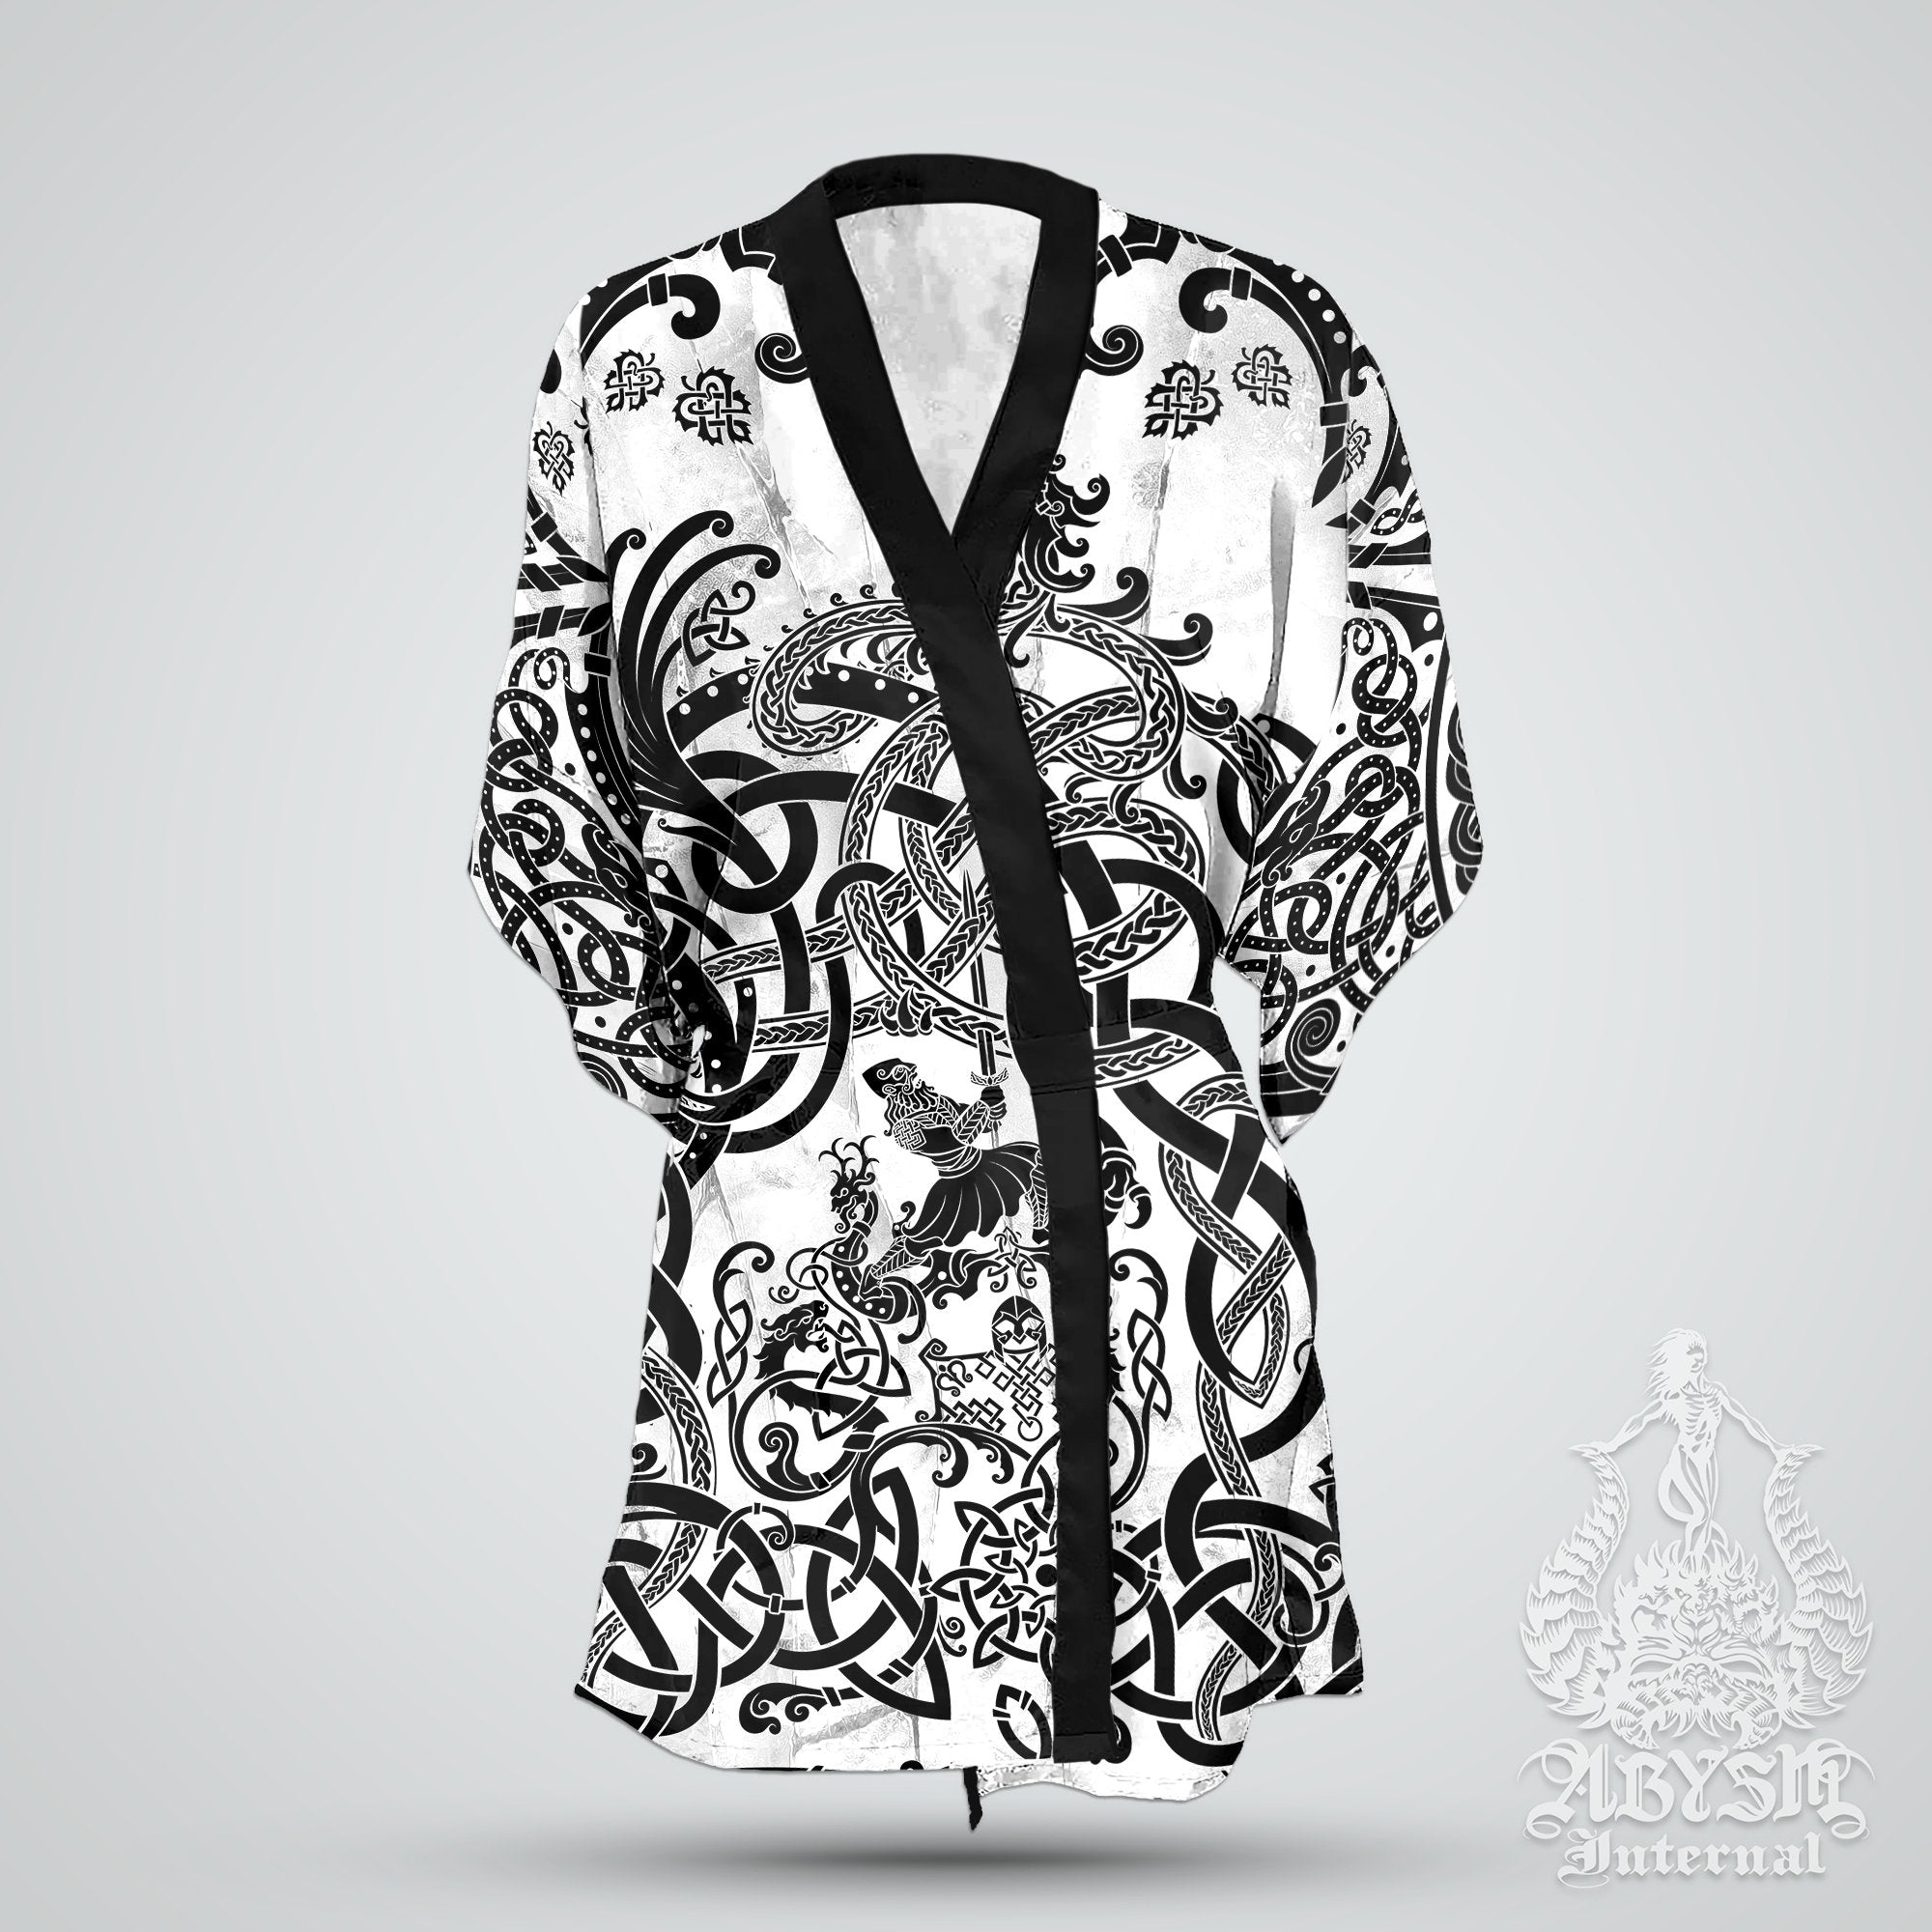 Viking Cover Up, Beach Outfit, Norse Party Kimono, Summer Festival Robe, Indie and Alternative Clothing, Unisex - Dragon Fafnir, White Black - Abysm Internal